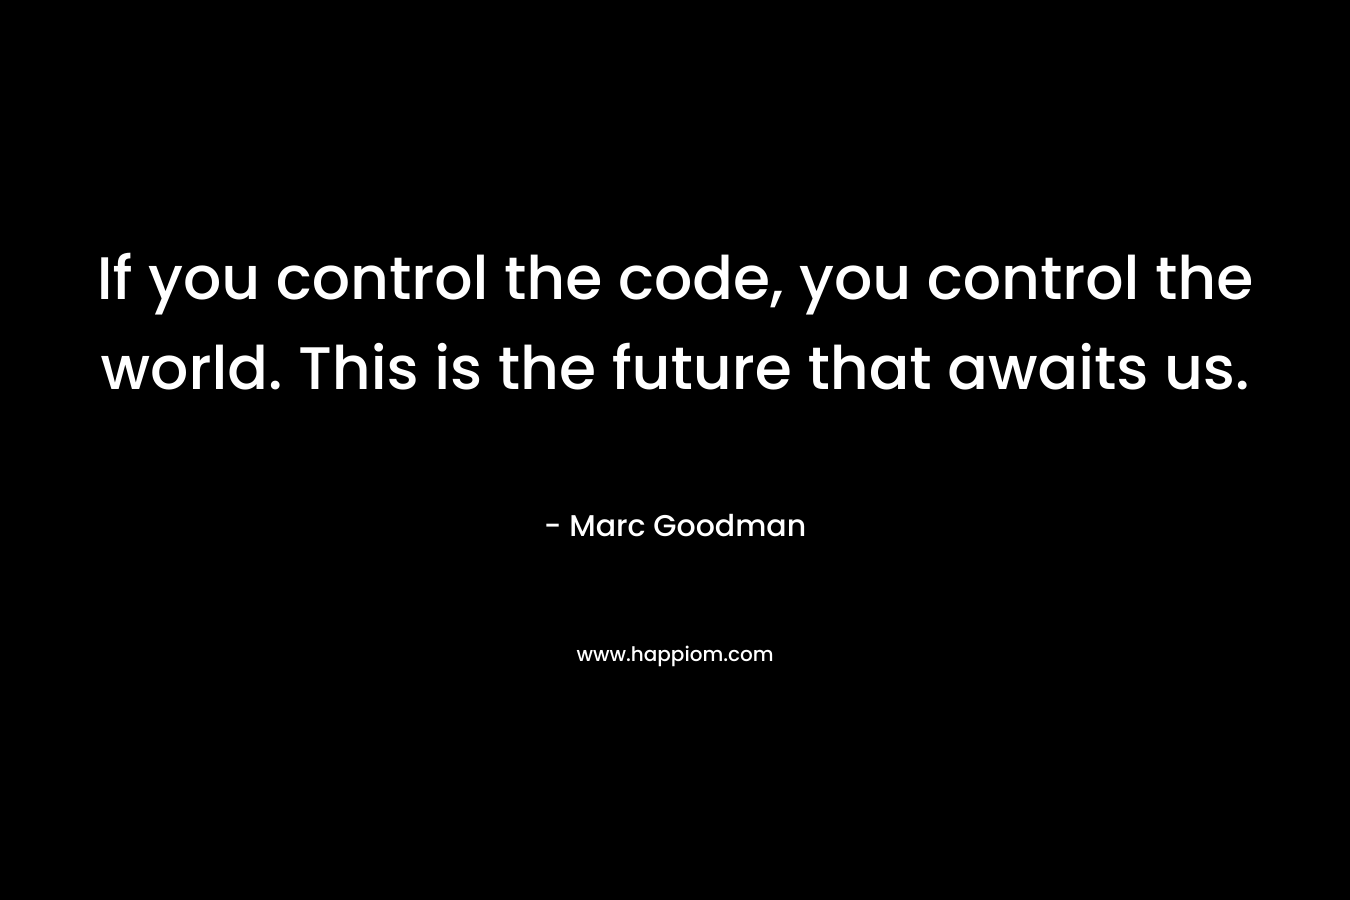 If you control the code, you control the world. This is the future that awaits us. – Marc Goodman